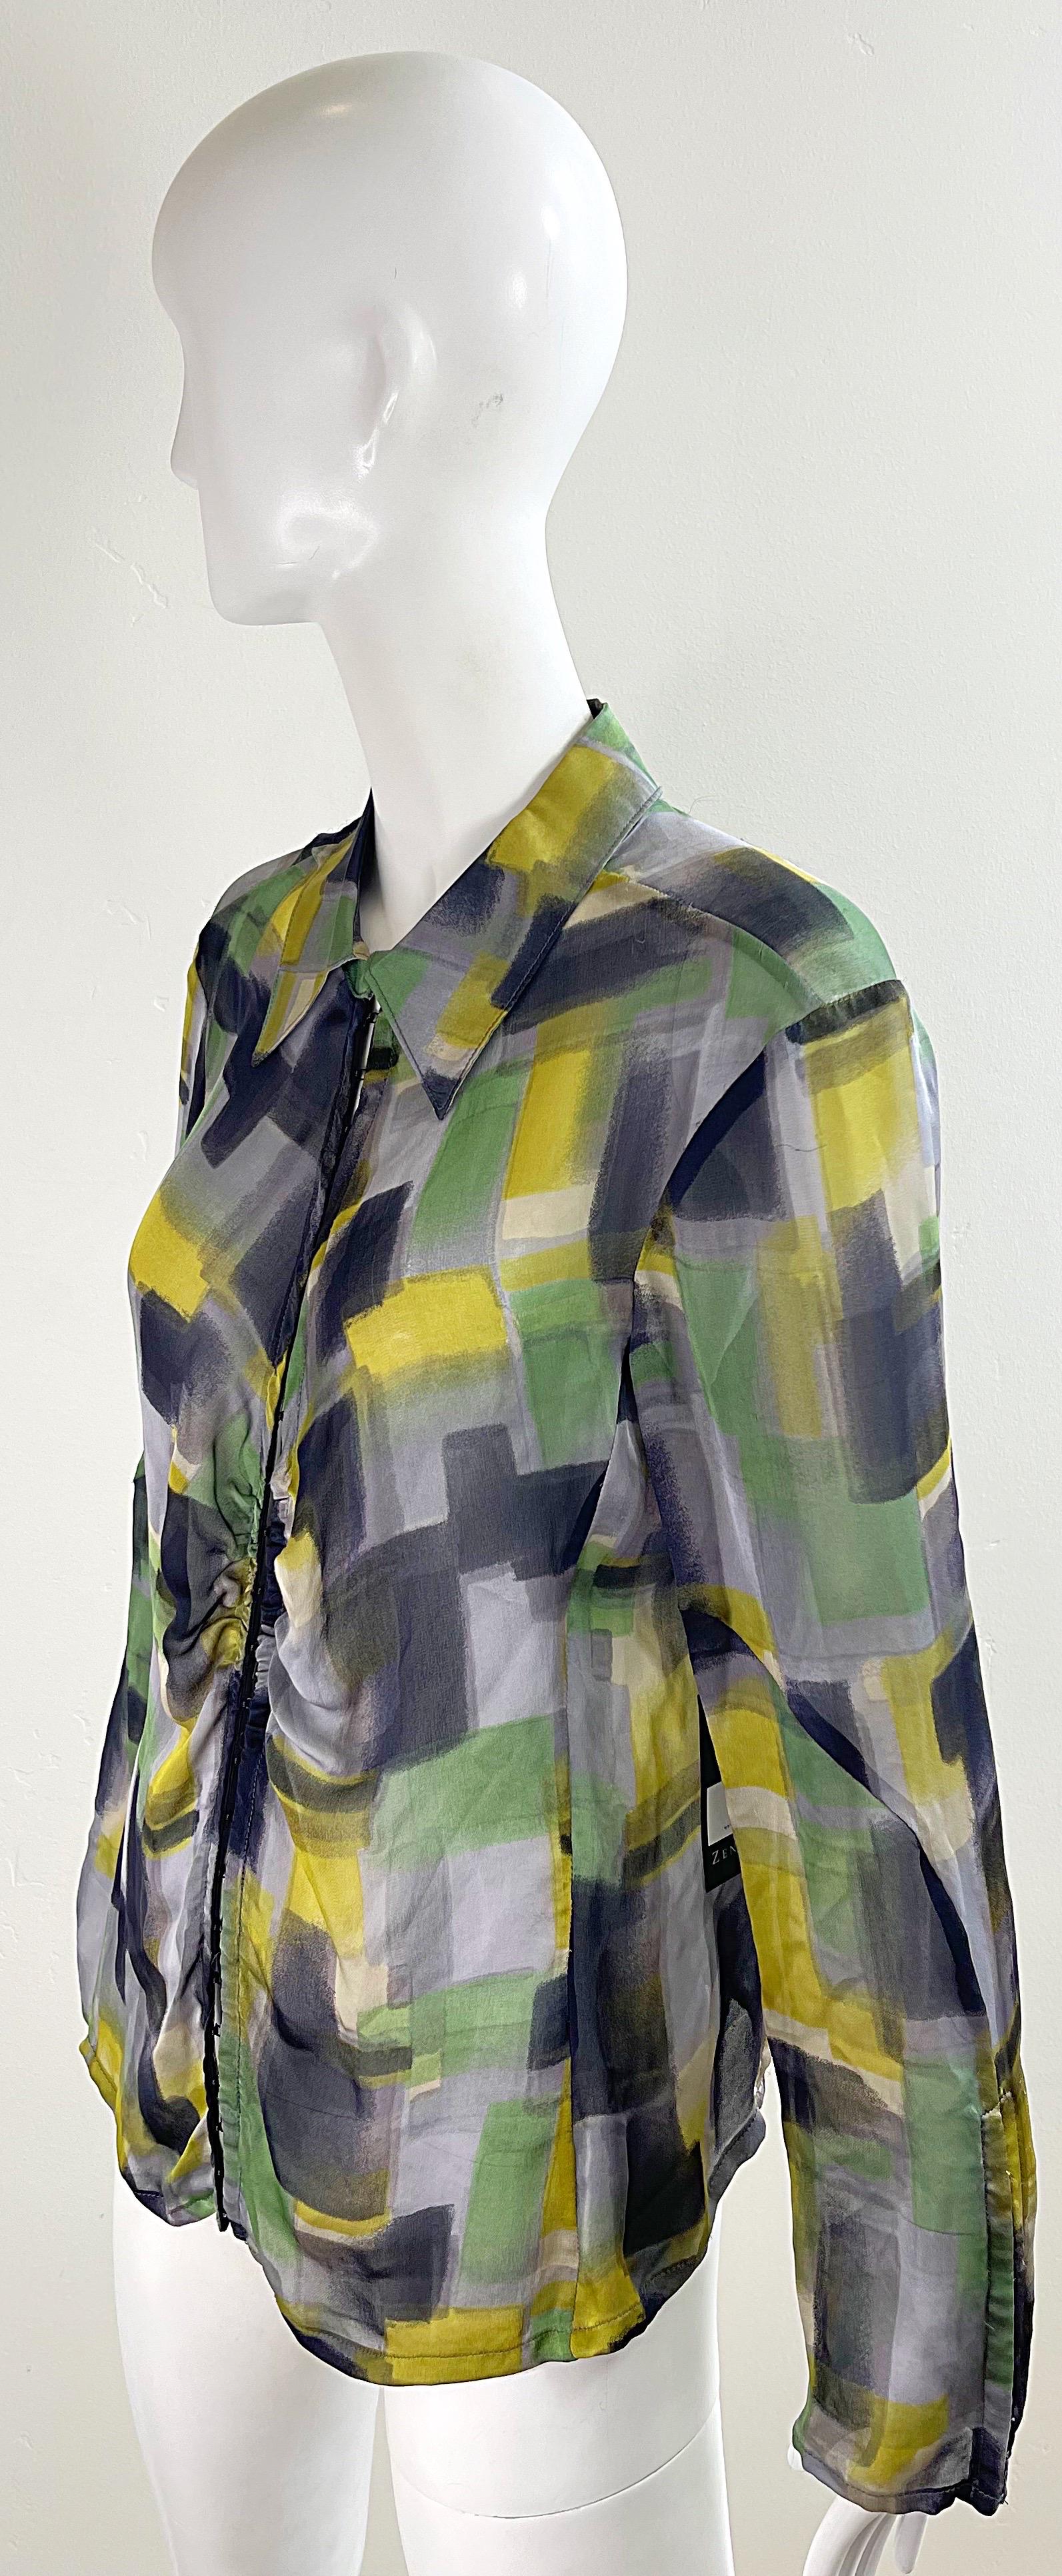 NWT Zenobia Saks 5th Avenue Size 12 Sheer Silk Chiffon Abstract Print Blouse Top For Sale 7